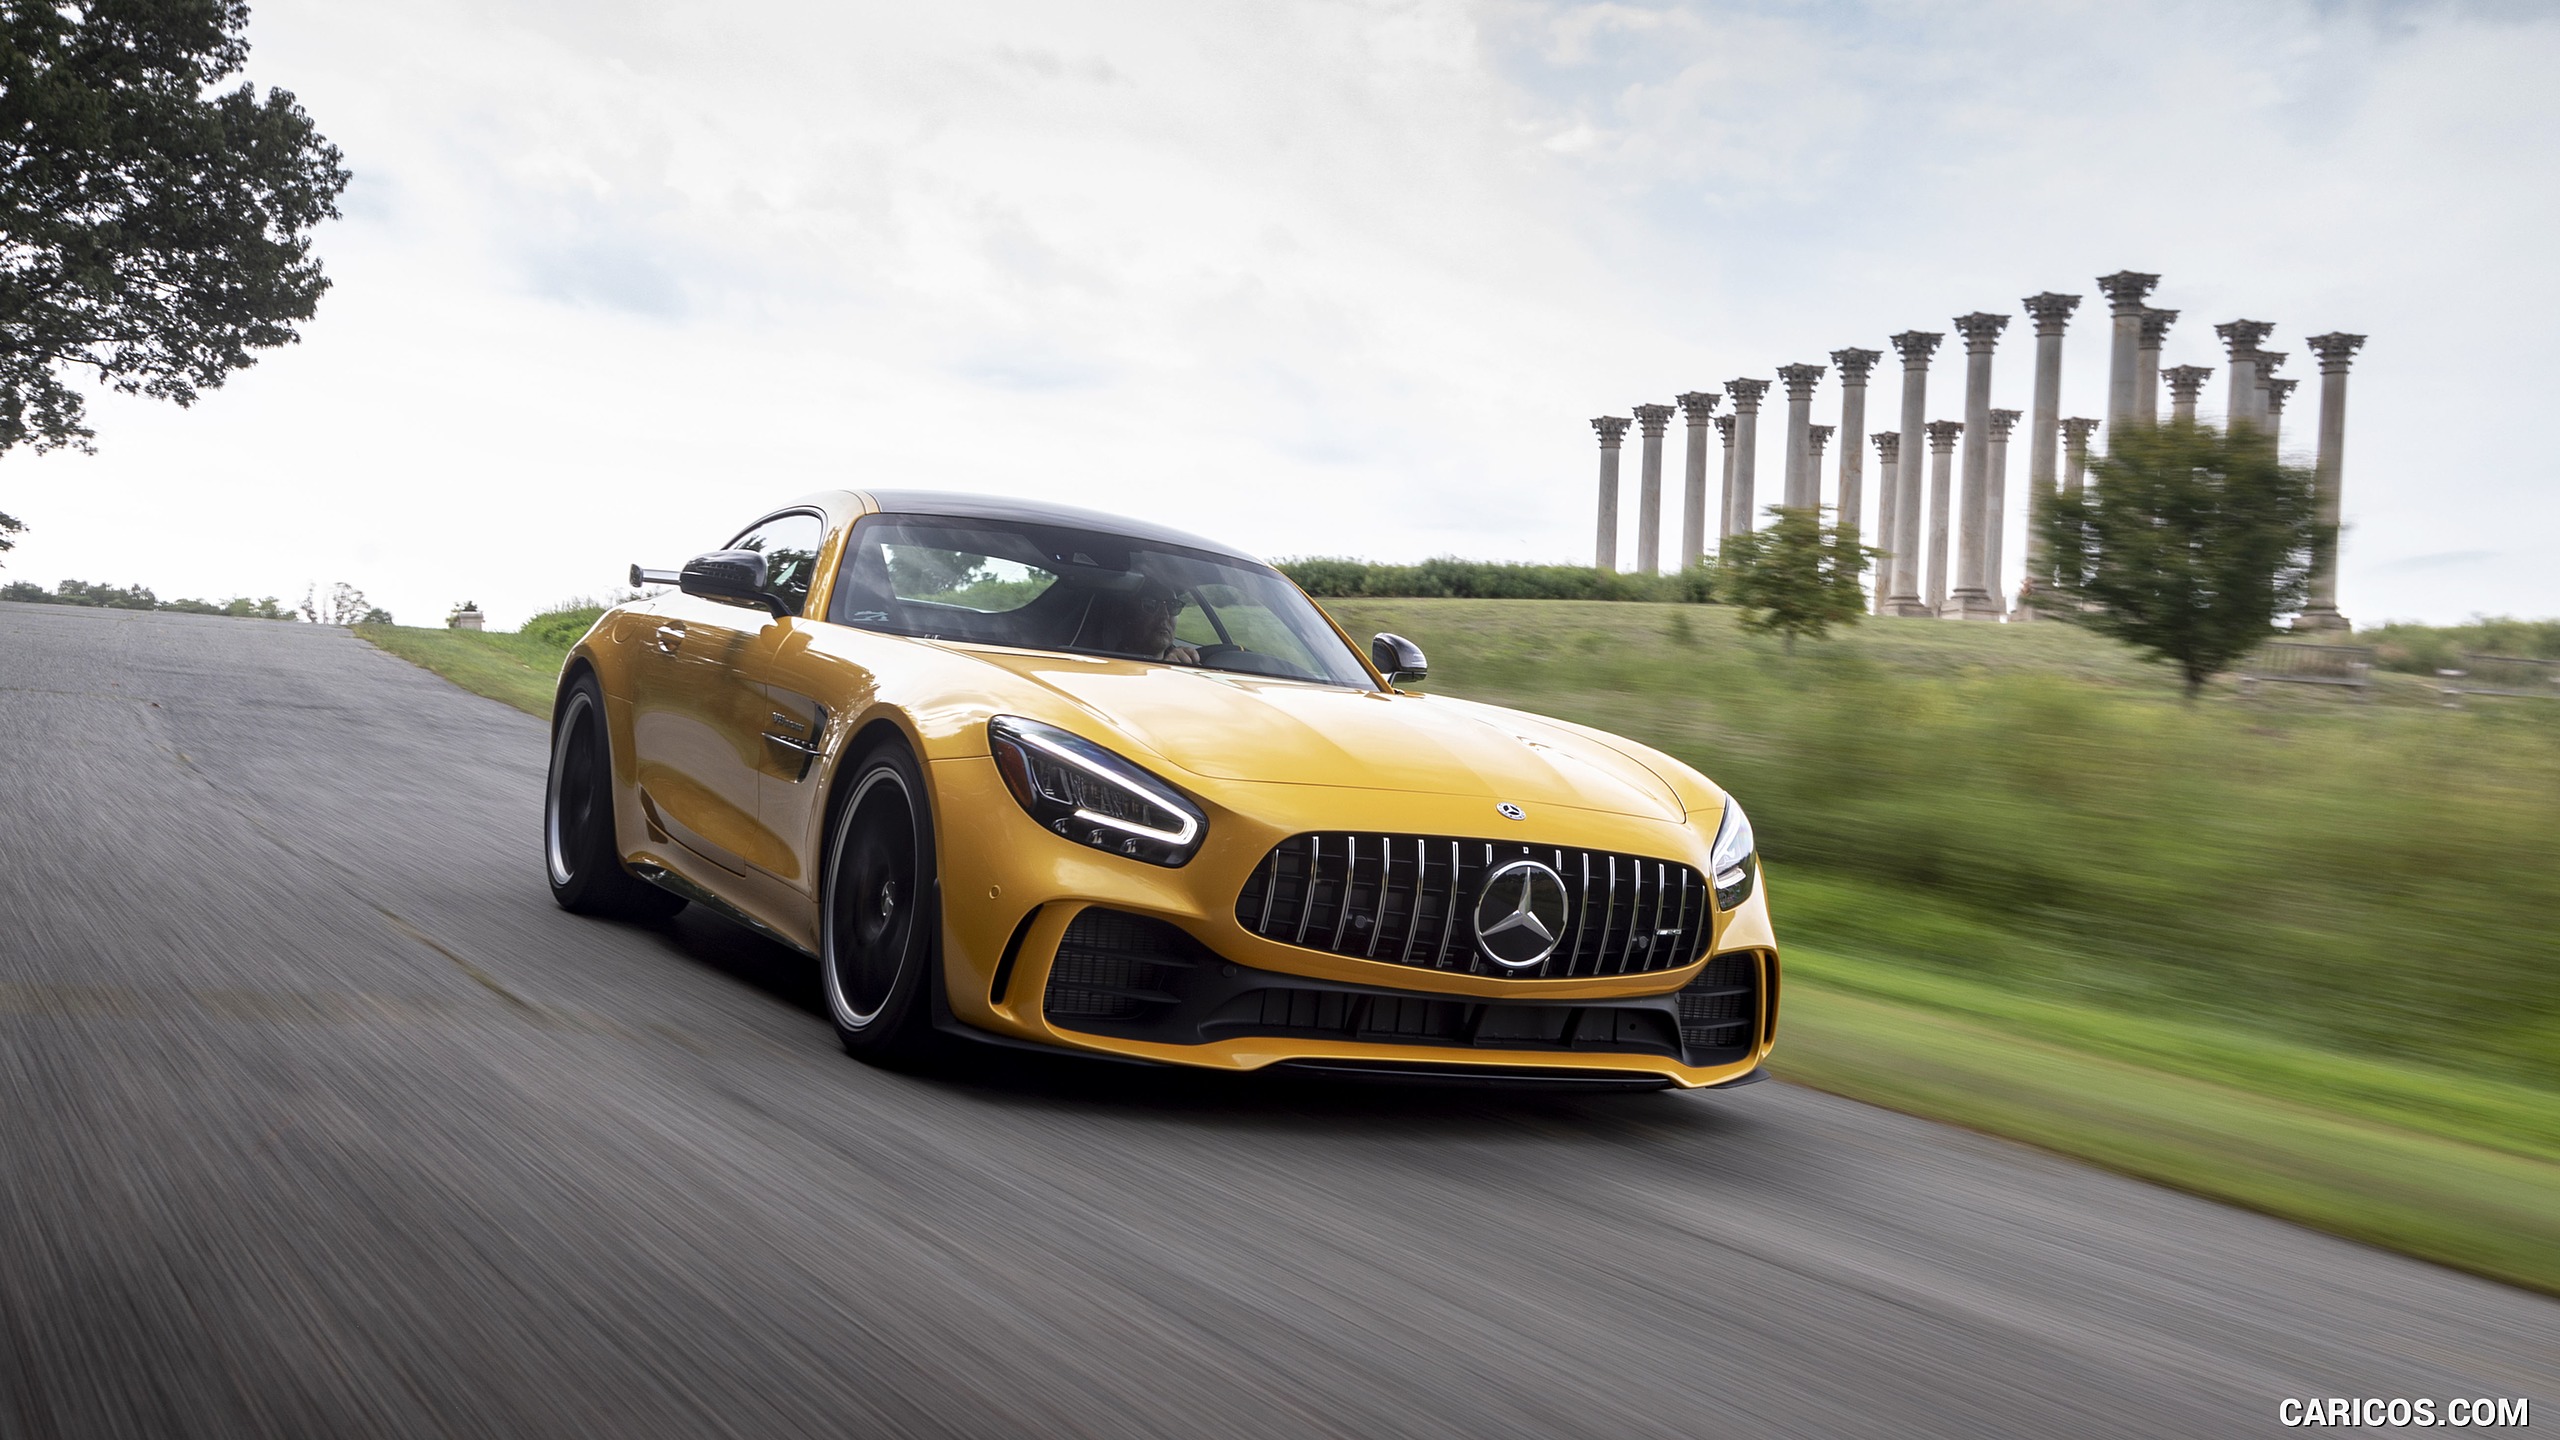 2020 Mercedes-AMG GT R Coupe (US-Spec) - Front Three-Quarter, #265 of 328